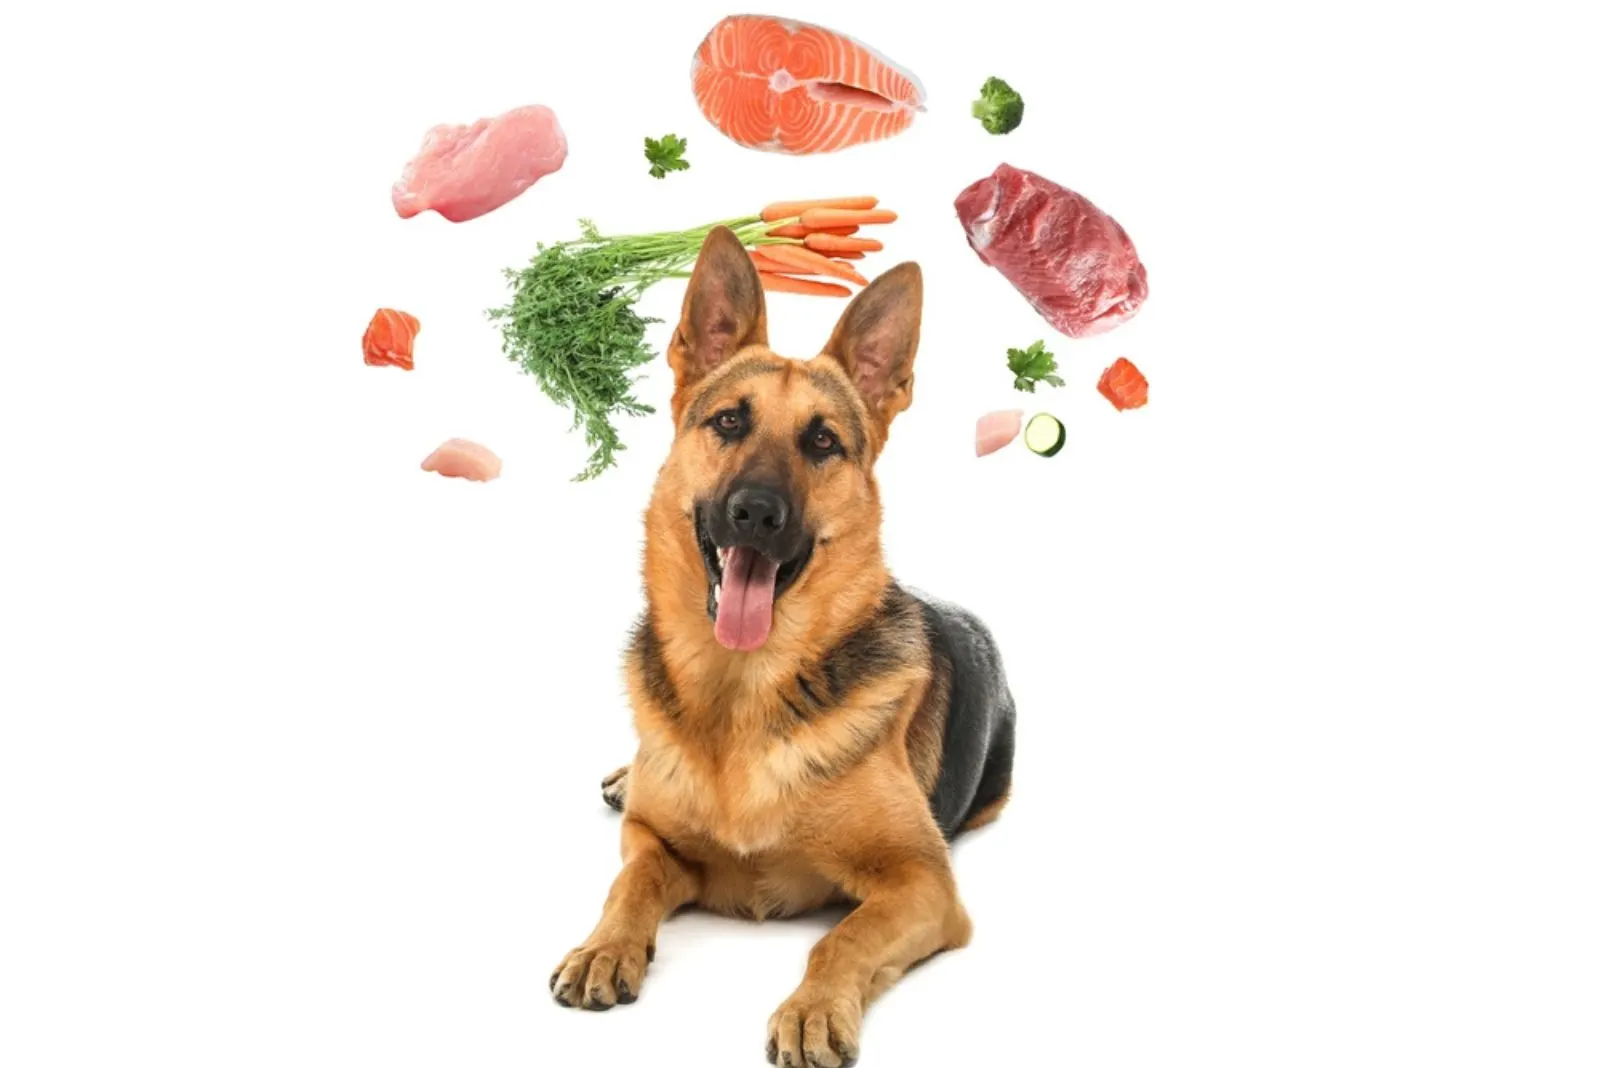 dog surrounded by fresh products rich in vitamins